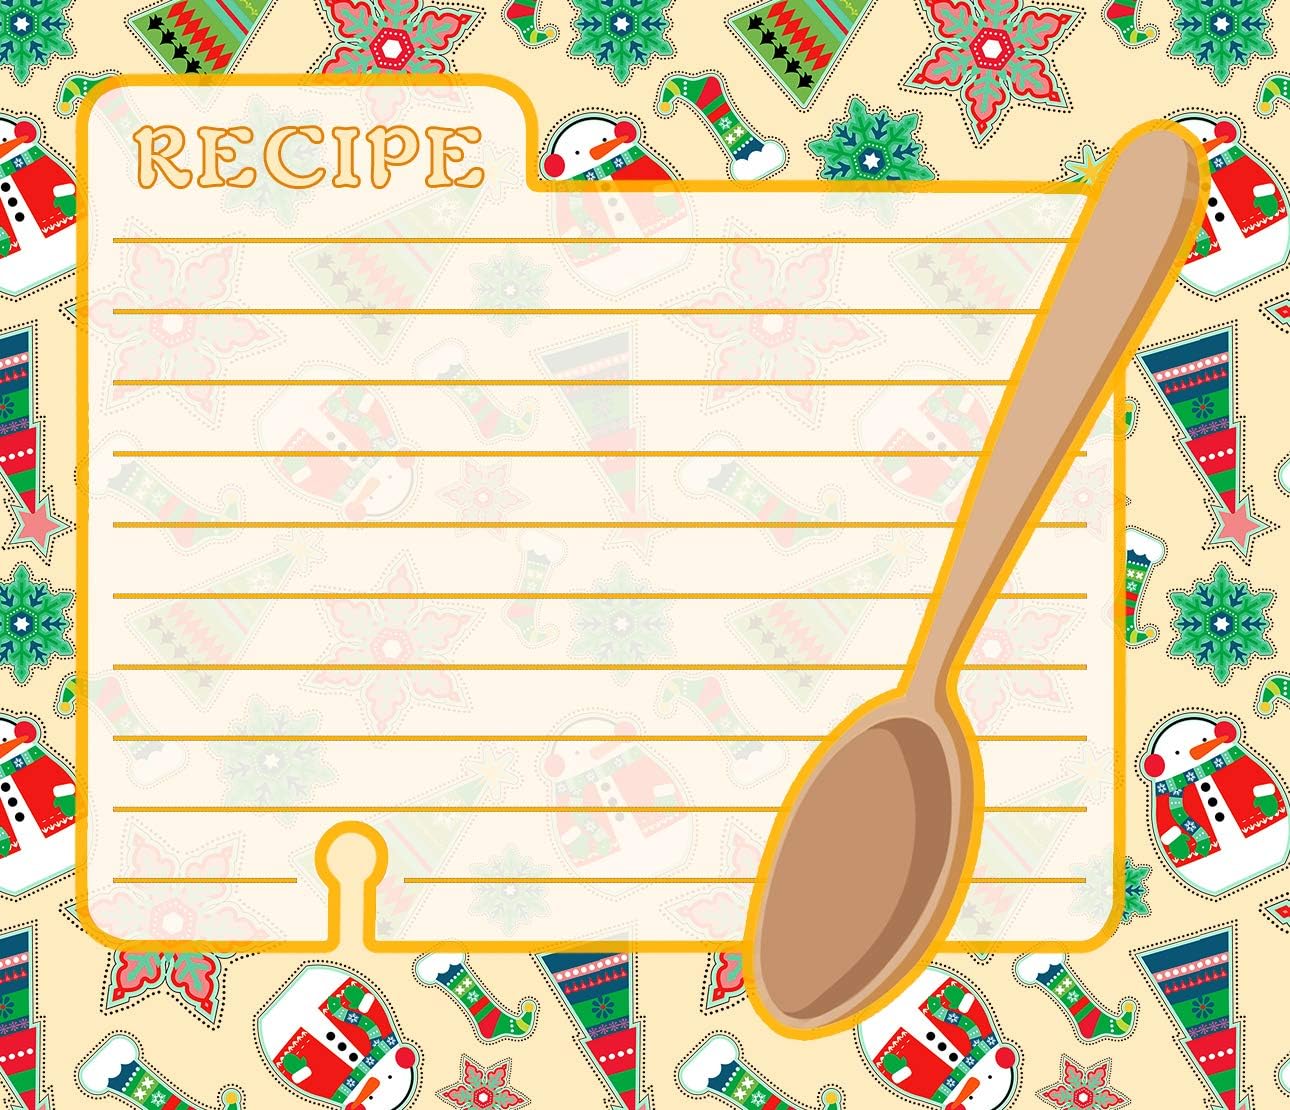 Christmas - Holiday Baking Kitchen Linen Set (6 Piece) - 2 Kitchen Towel, 2 Pot Holders, 1 Oven Mitt, 1 Magnetic Dry Erase Recipe Planner (Style 06)